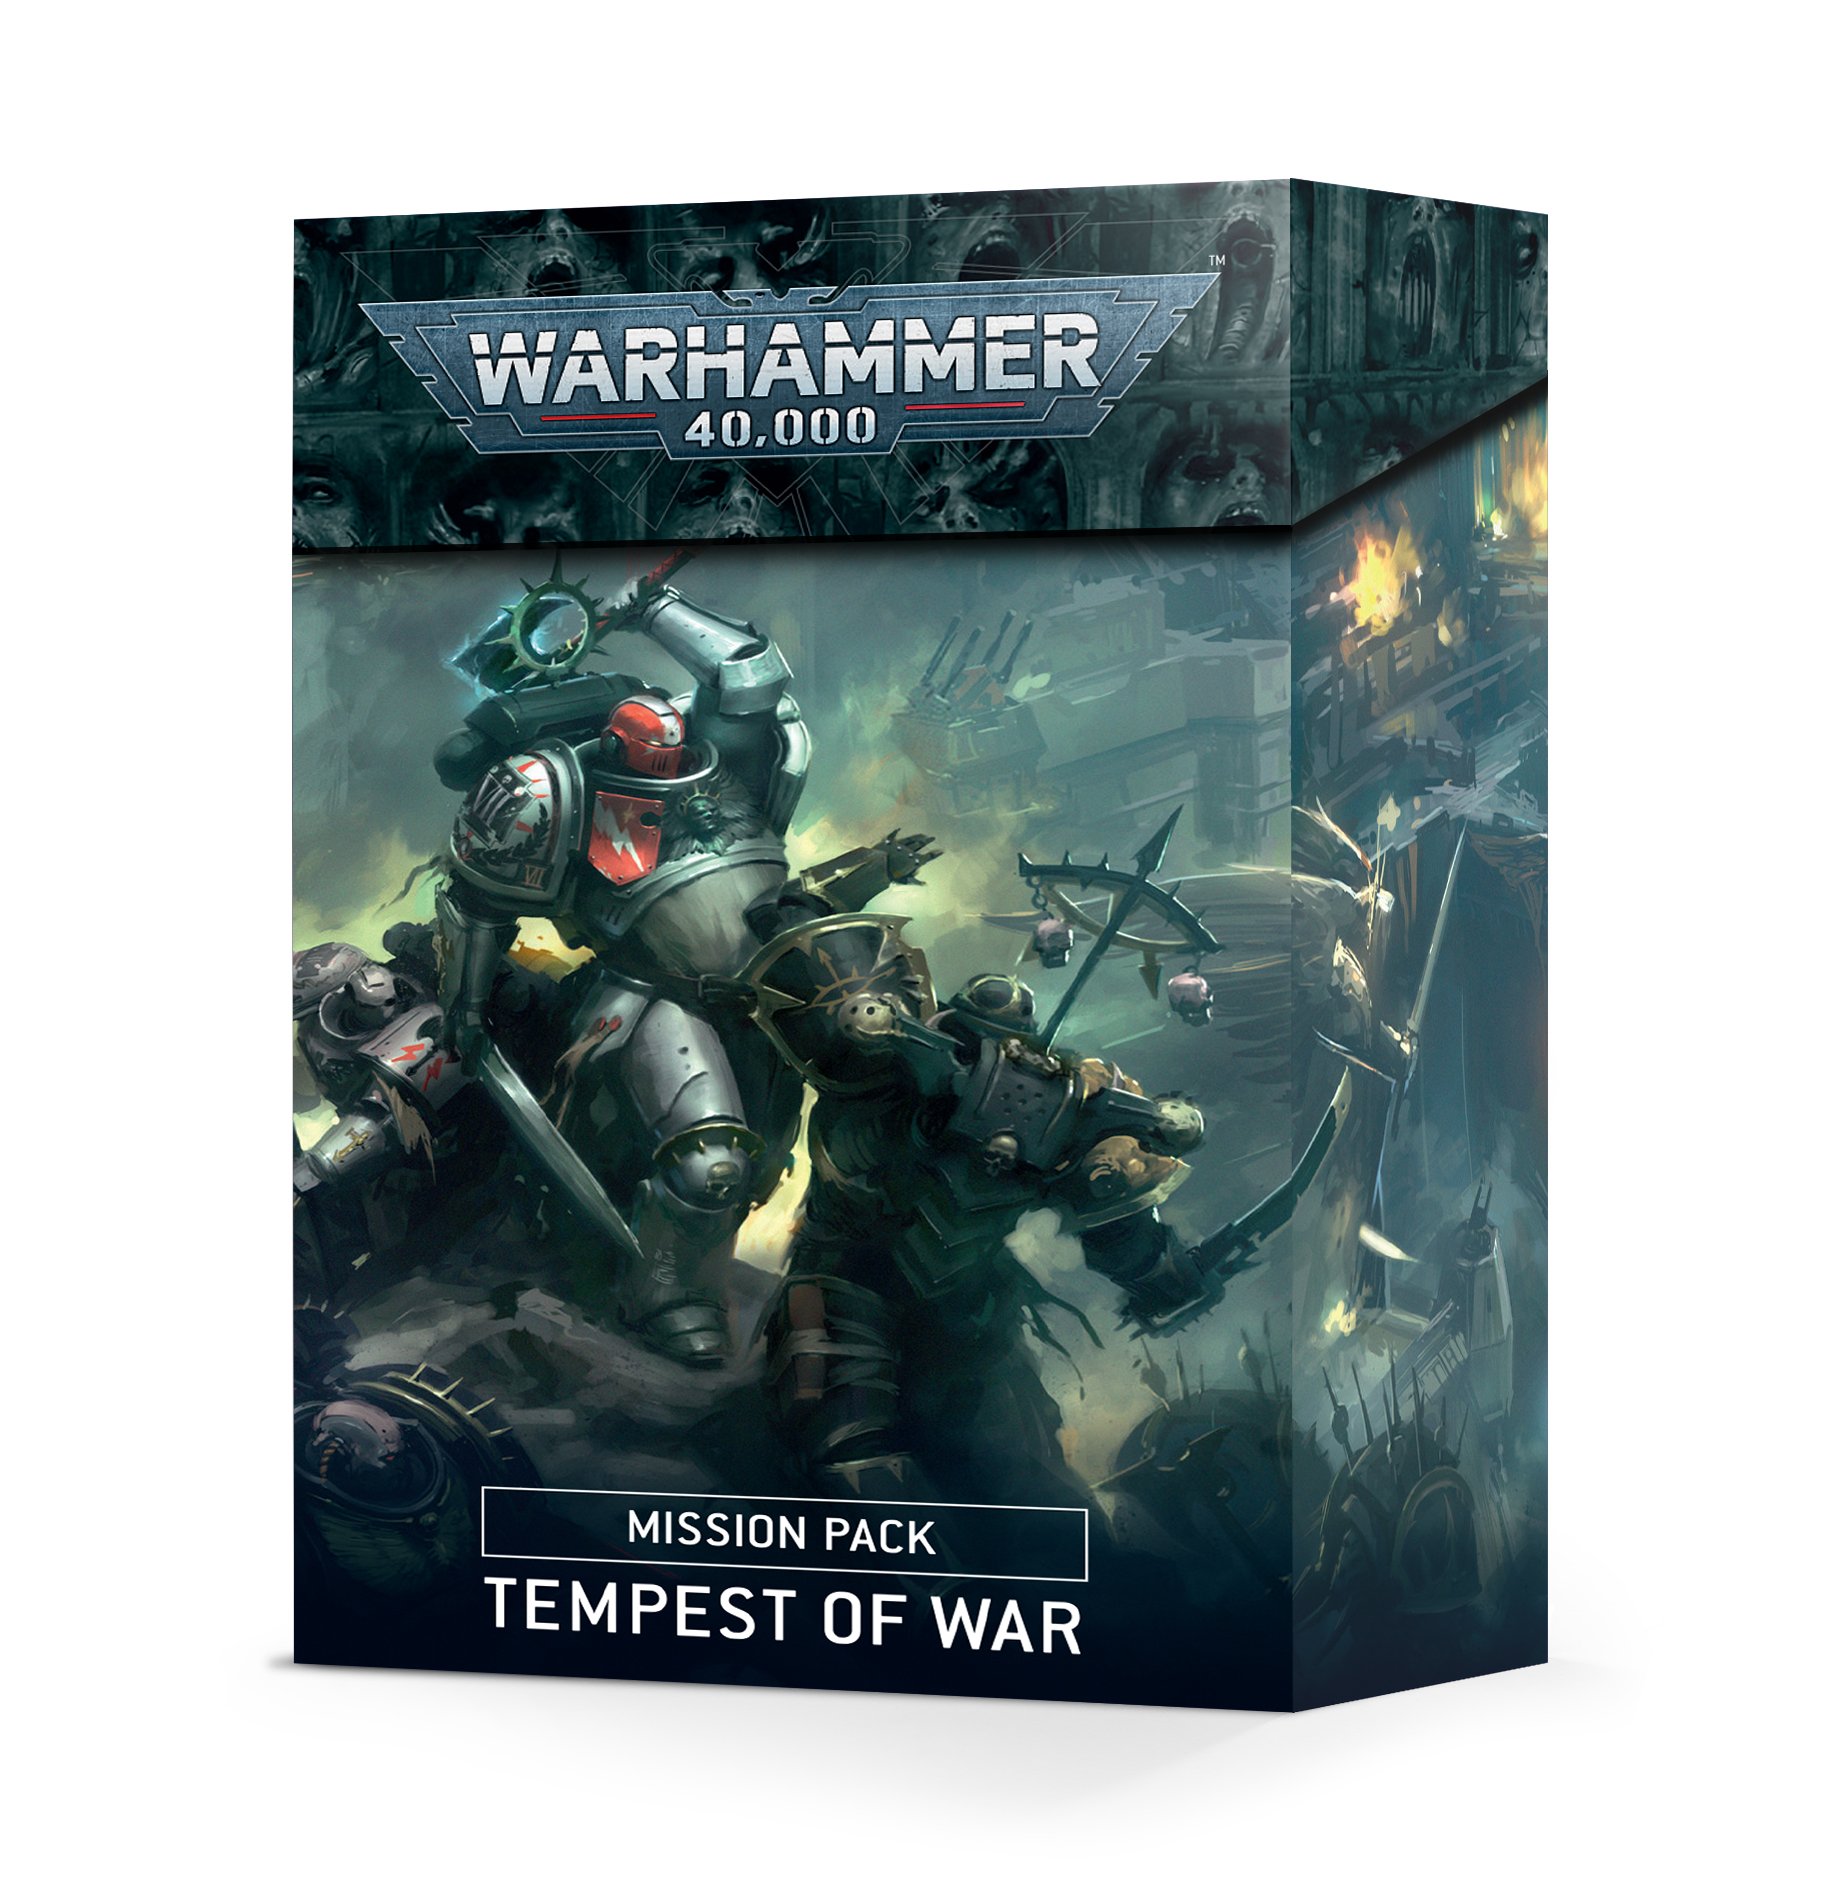 Warhammer cards. Tempest Warhammer. Warhammer 40,000 Paints and Tools Set. Tempest Rising обложка. Warhammer 40000 Card.